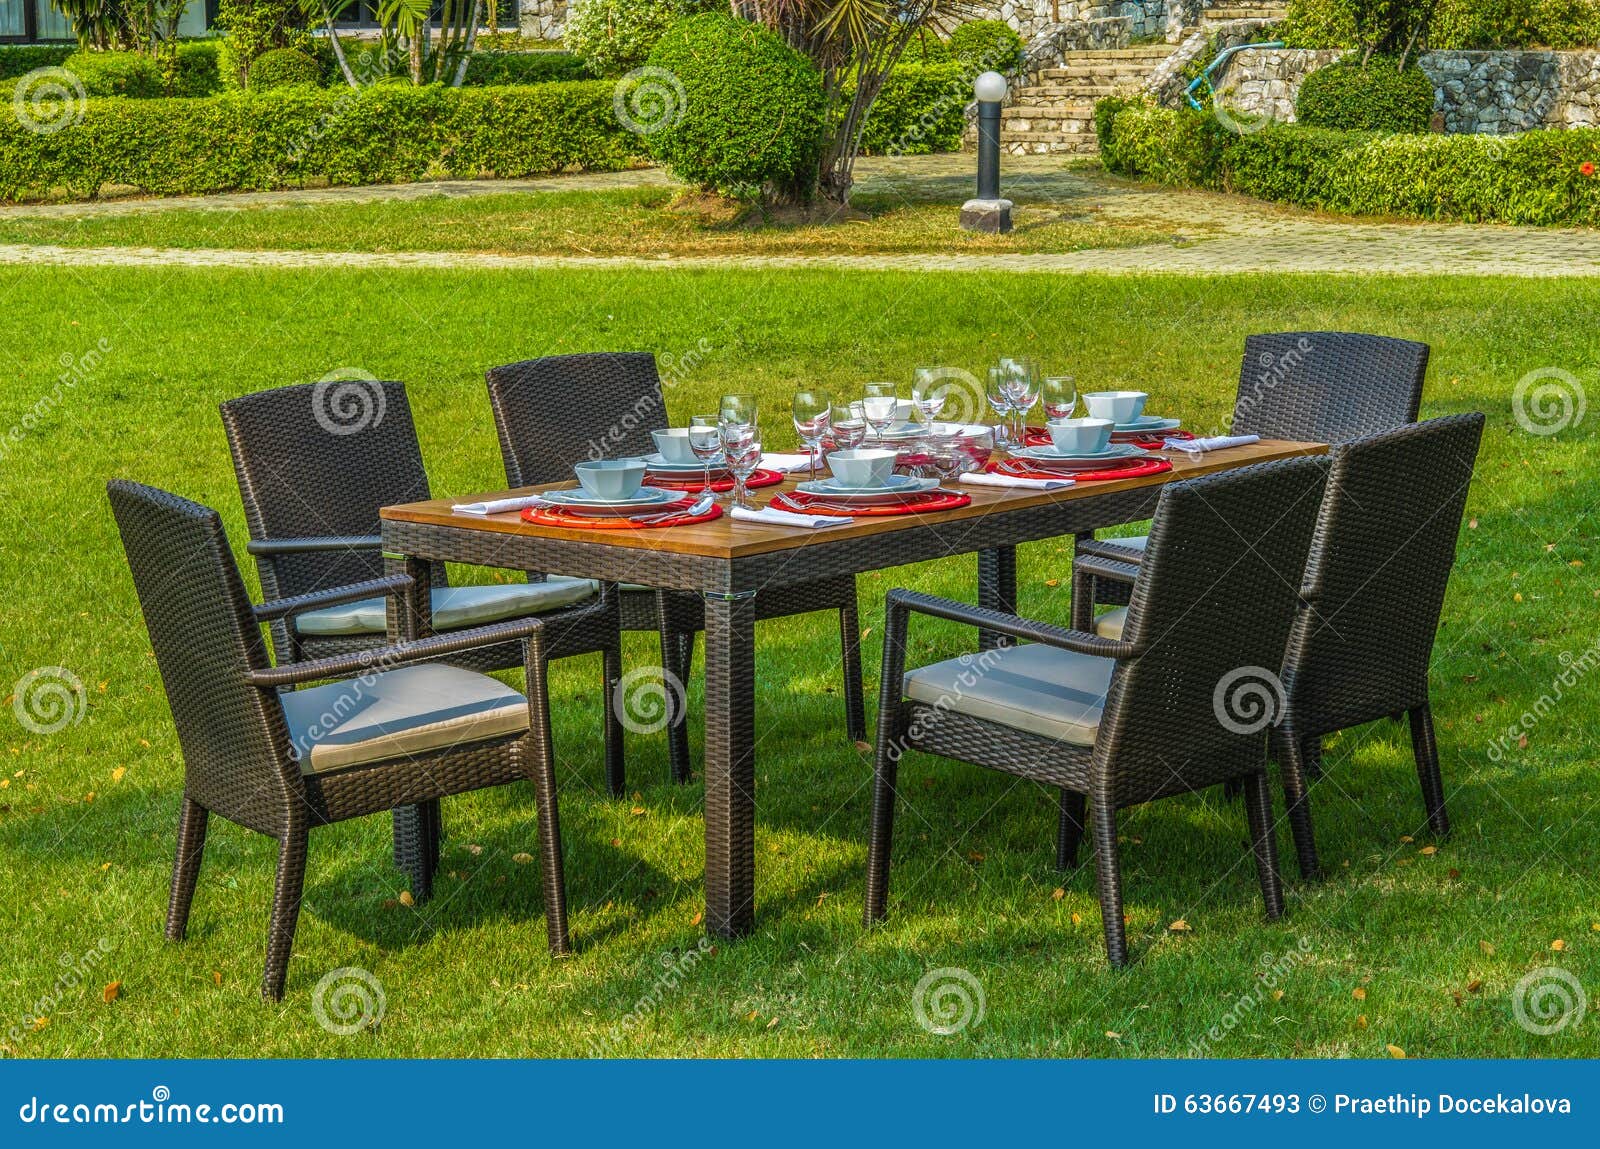 Outdoor Rattan Furniture, Table and Chairs Stock Image - Image of